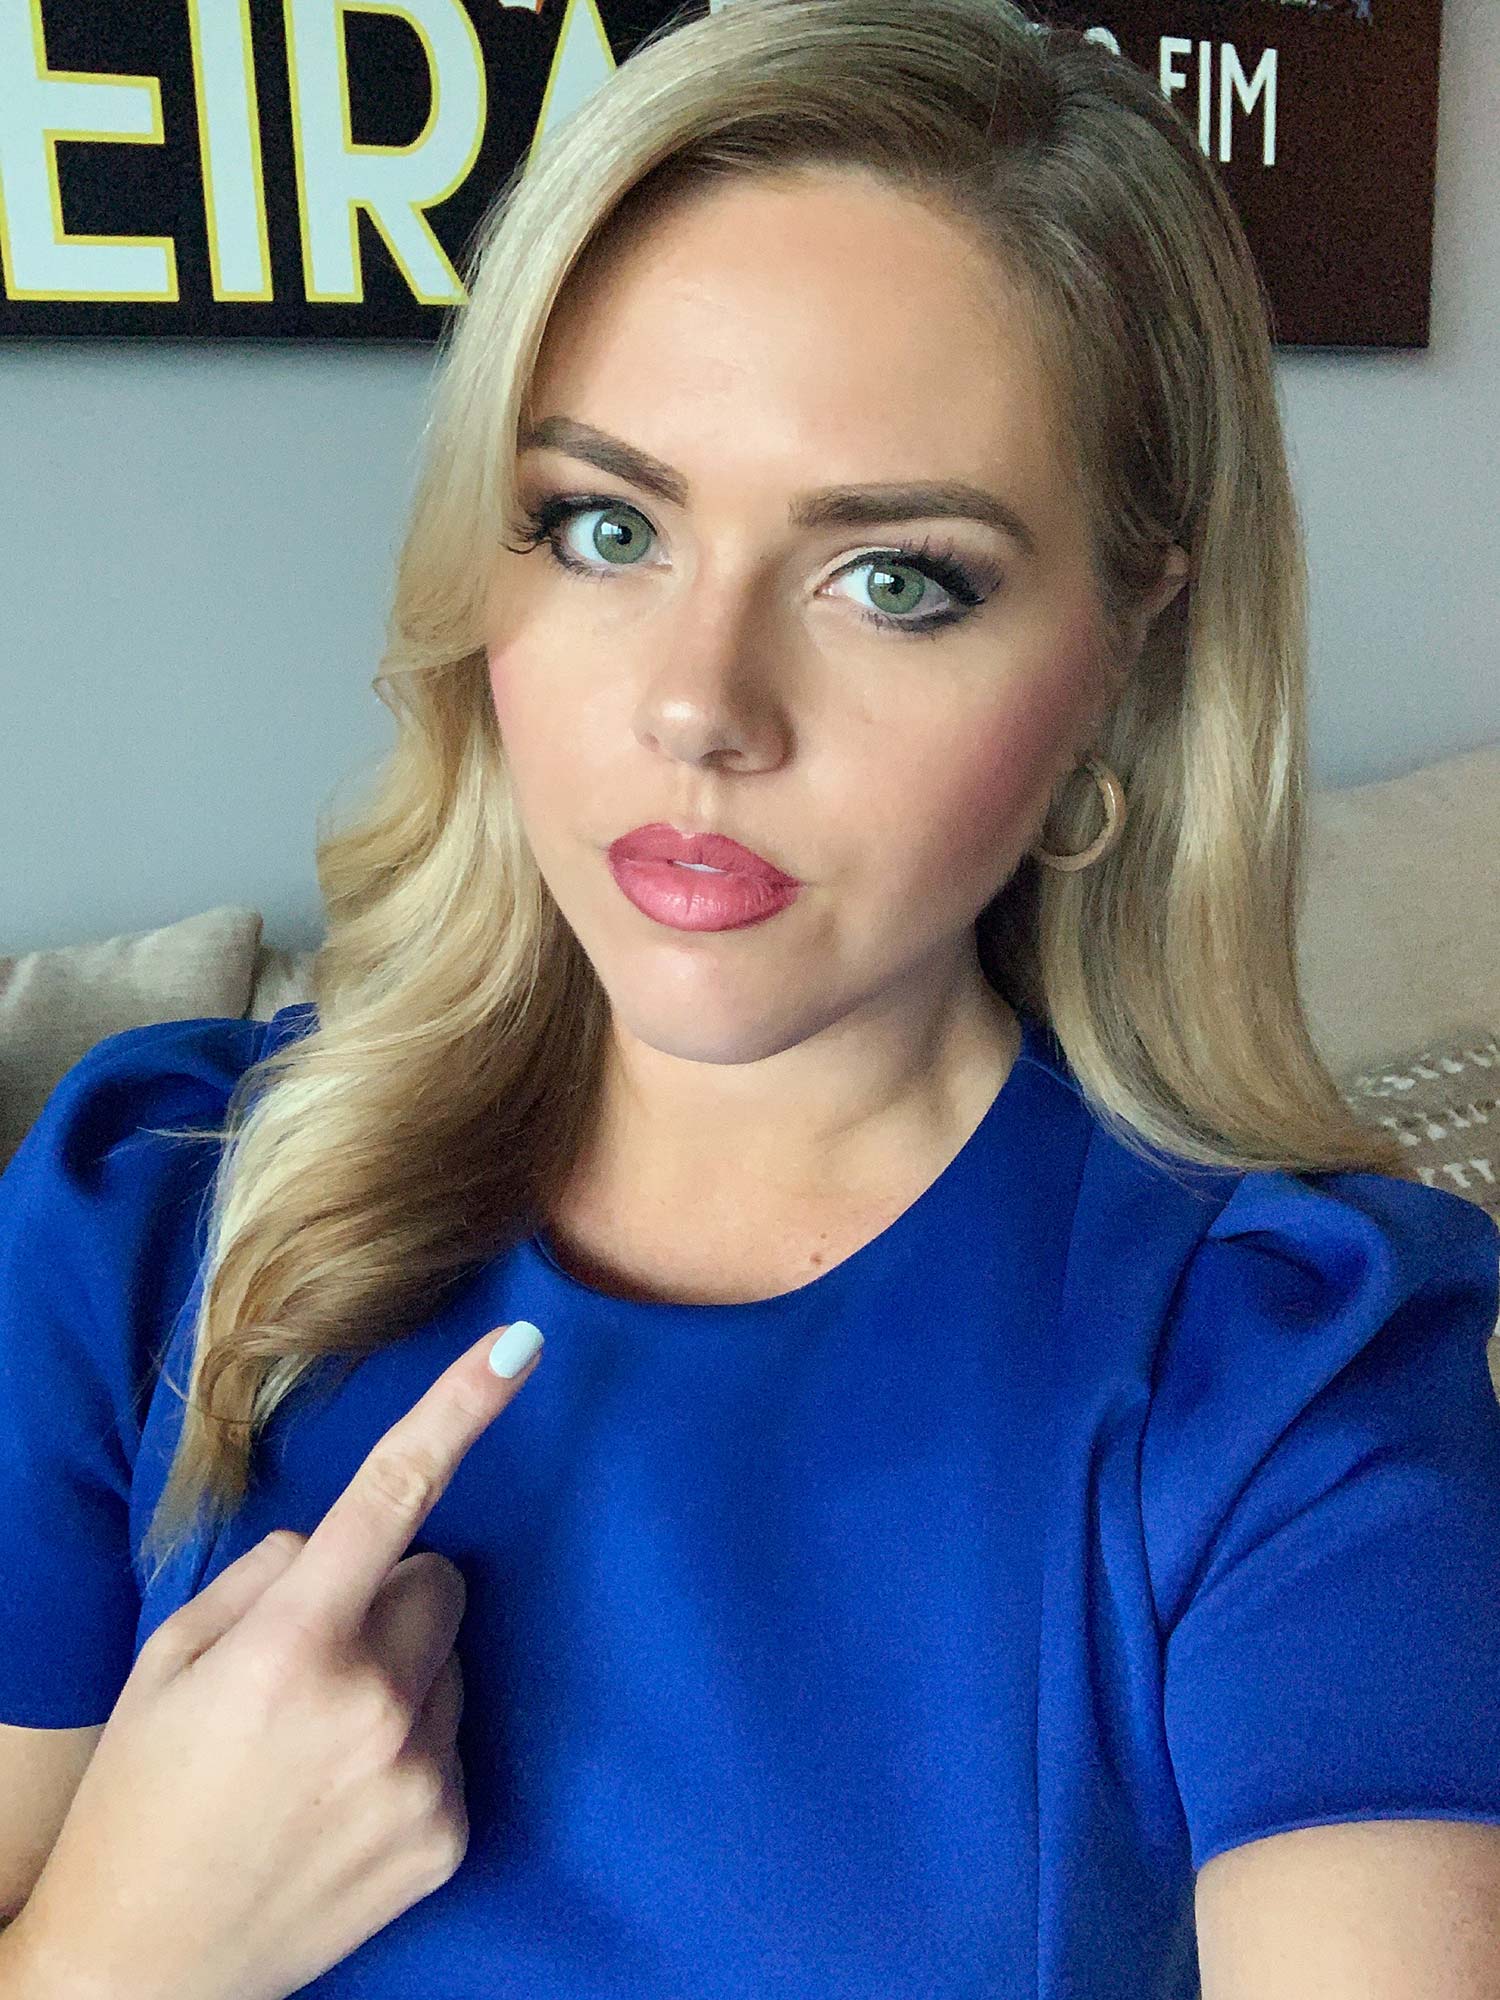 Selfie of Victoria Price that went viral. In the post she points to her neck and wears a bright blue dress.